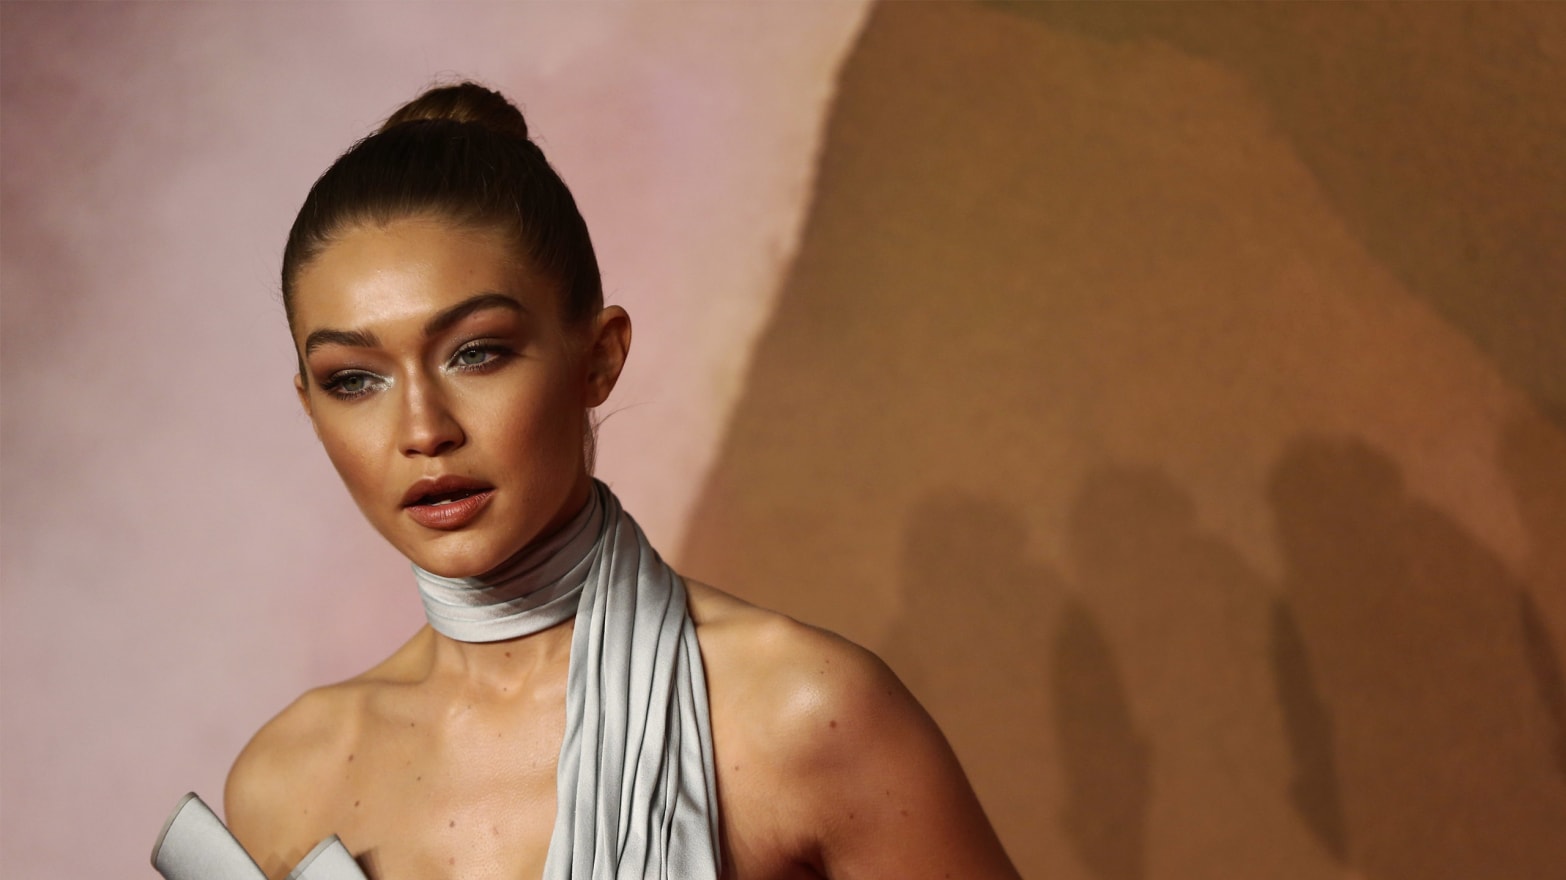 Gigi Hadid Mimics Asian Eyes On Instagram Sparks Racism Accusations